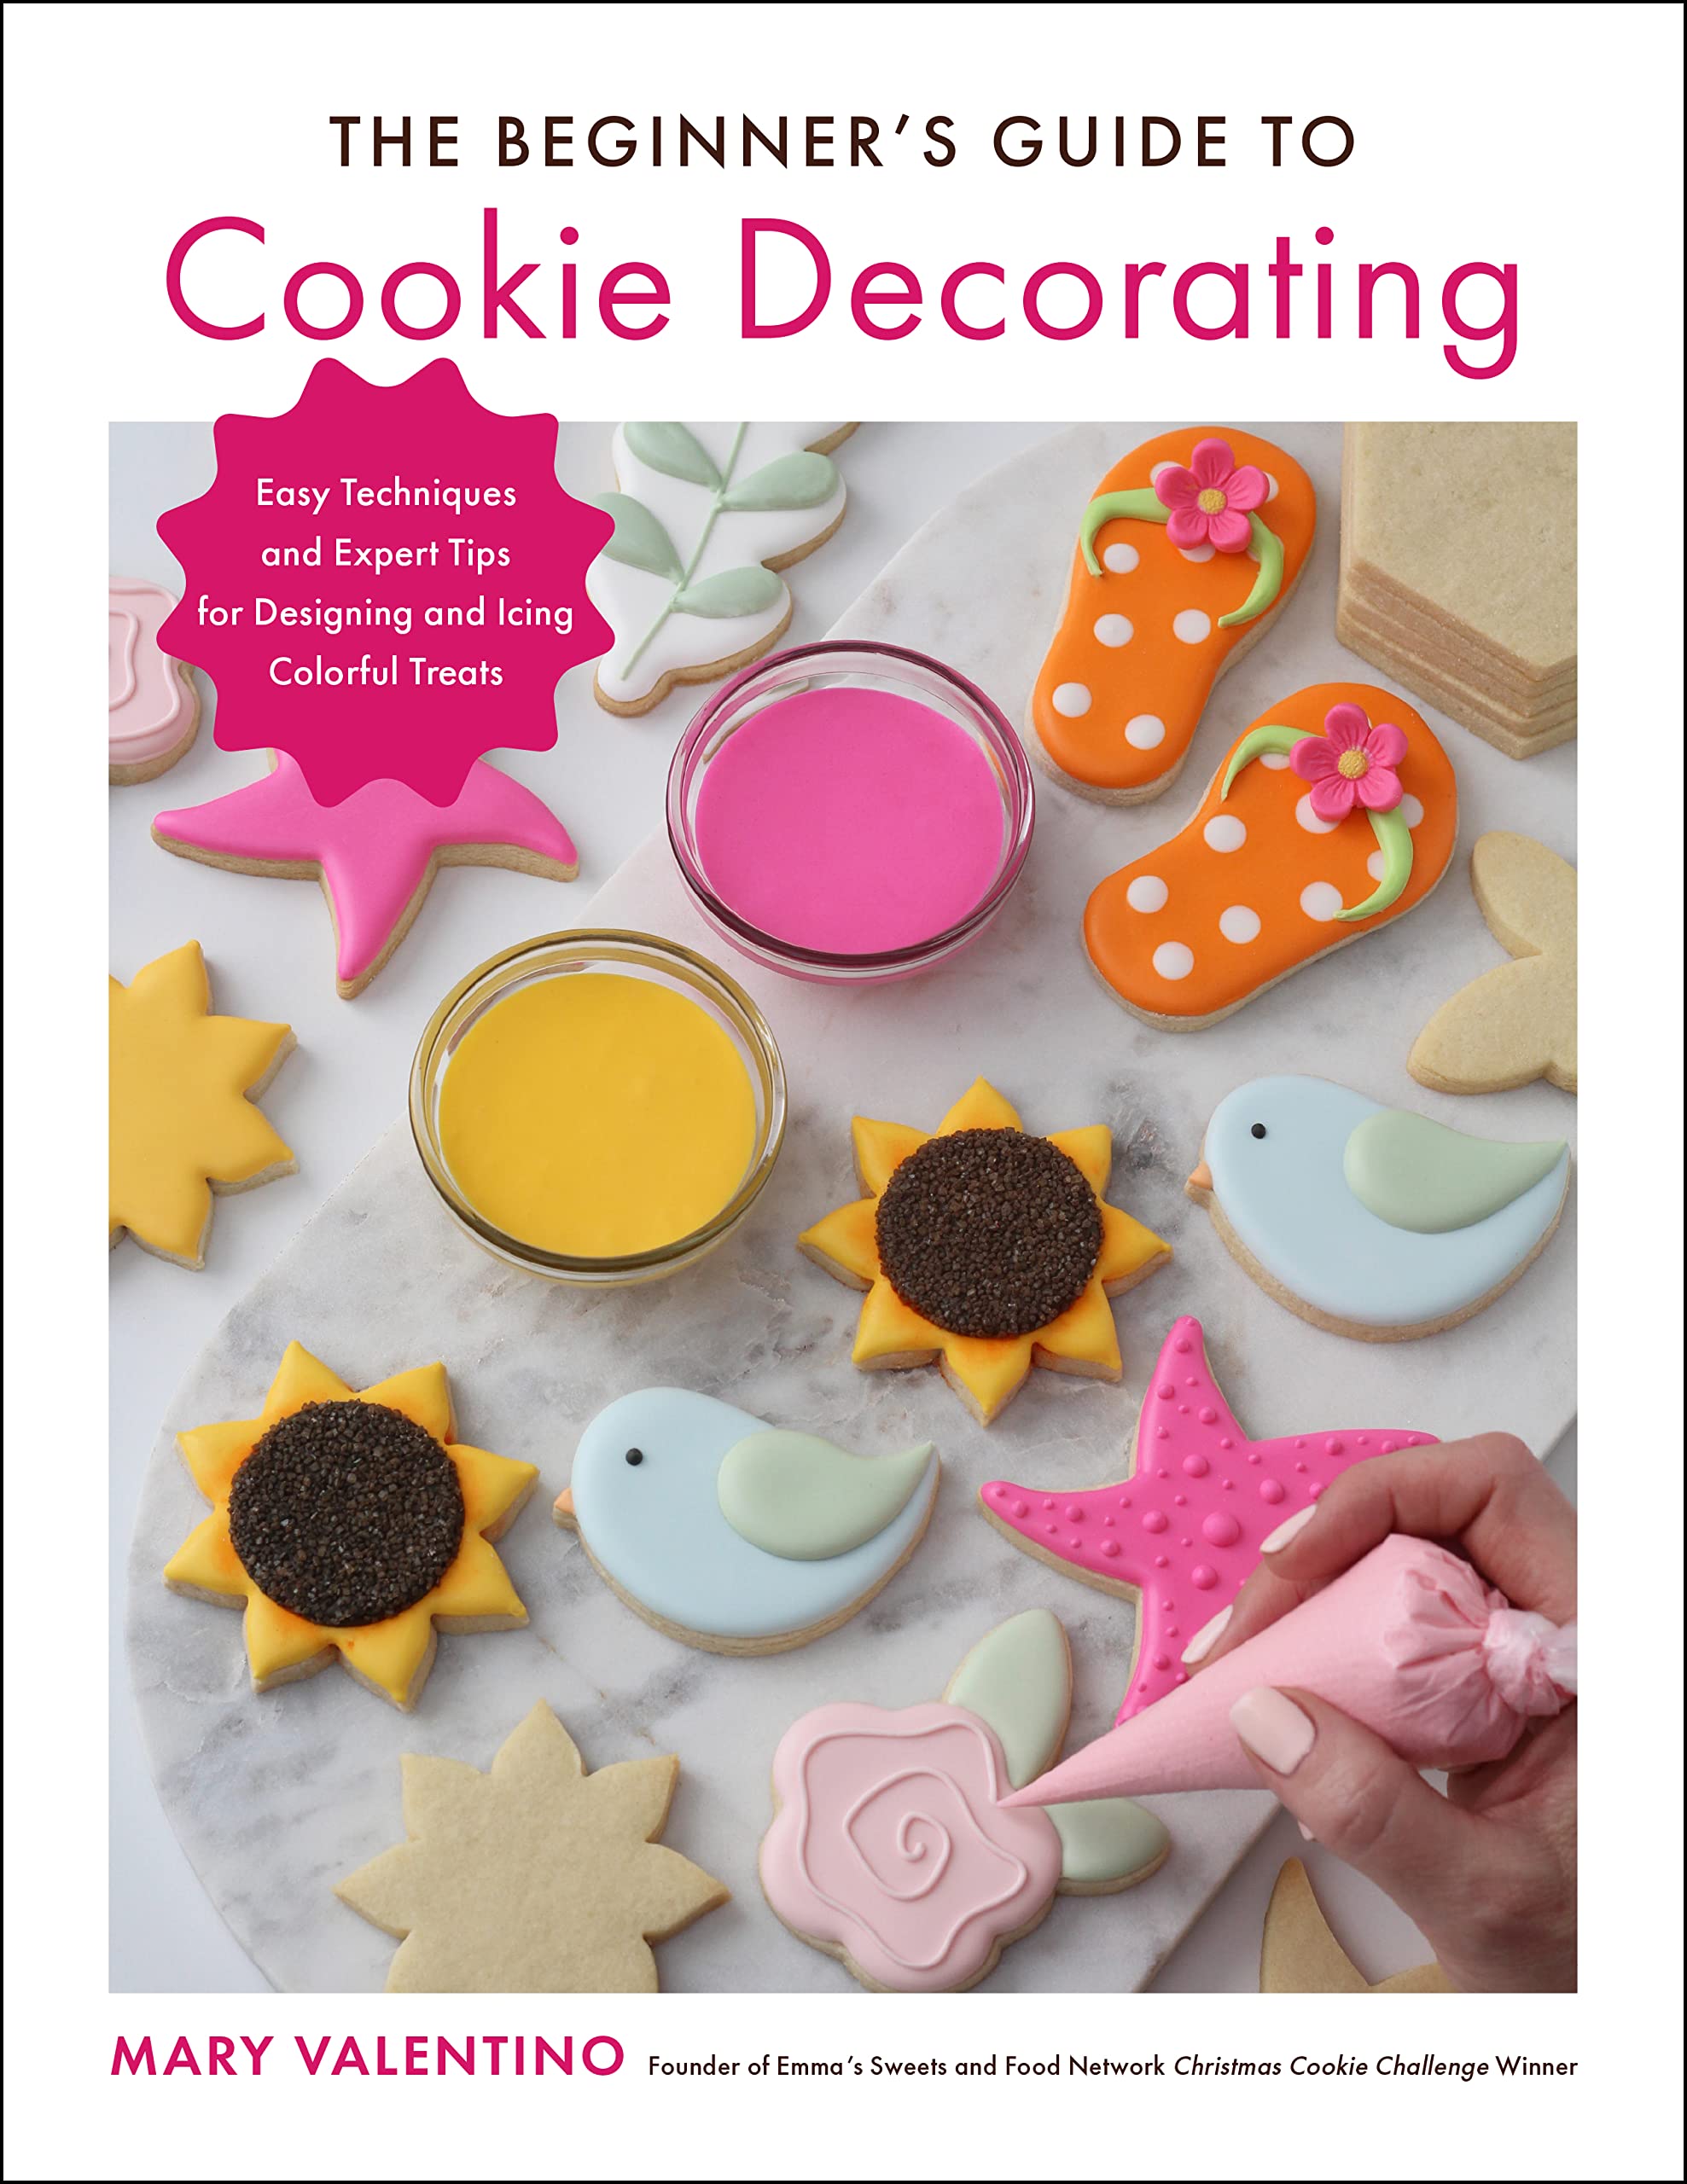 The Beginner's Guide to Cookie Decorating: Easy Techniques and Expert Tips for Designing and Icing Colorful Treats (Mary Valentino)